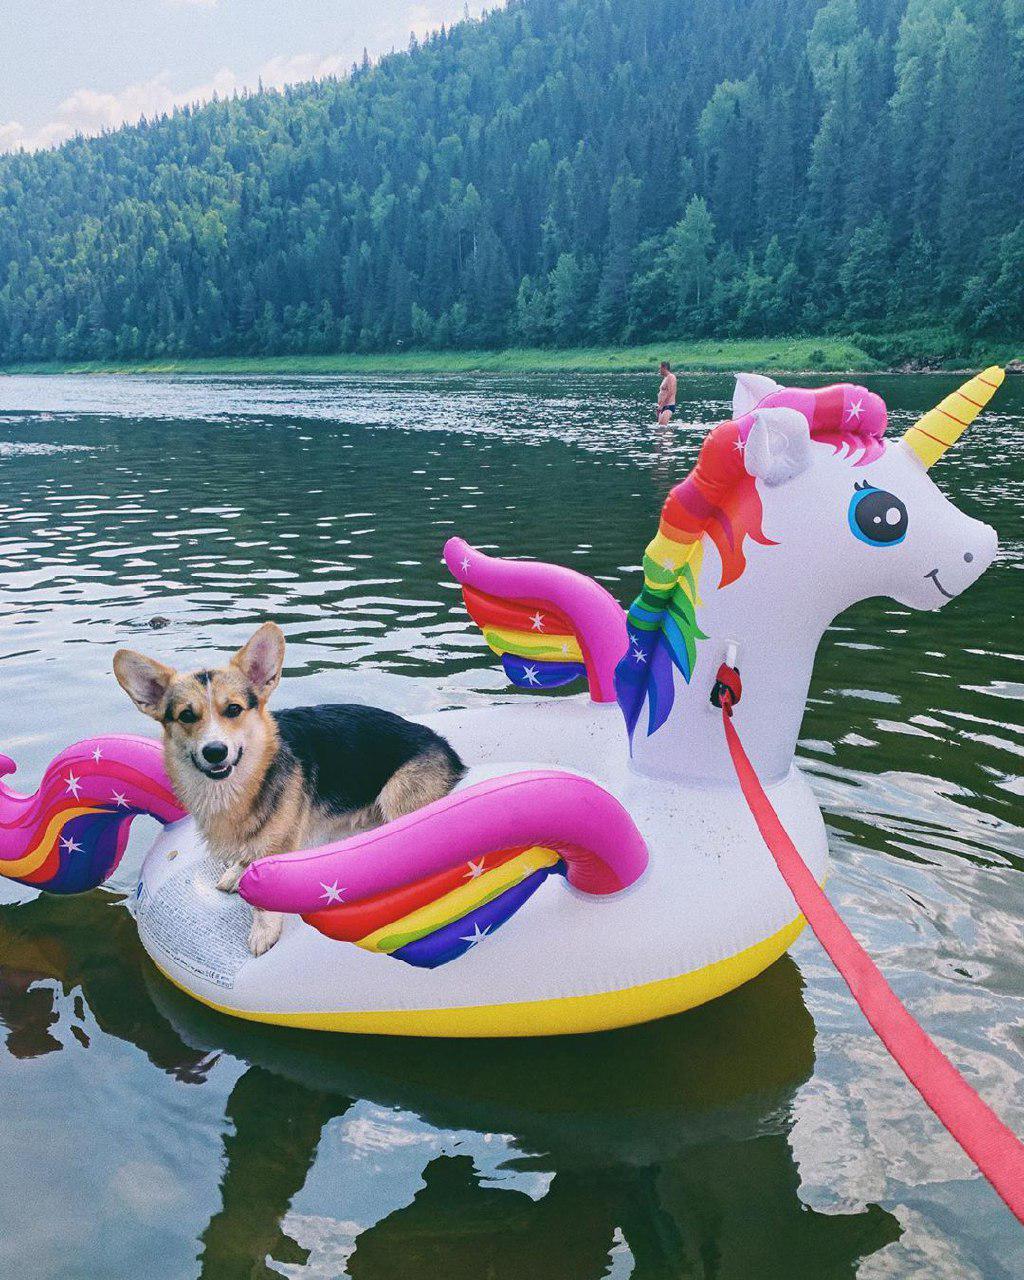 Corgi sitting on top of the unicorn inflatable float in the lake